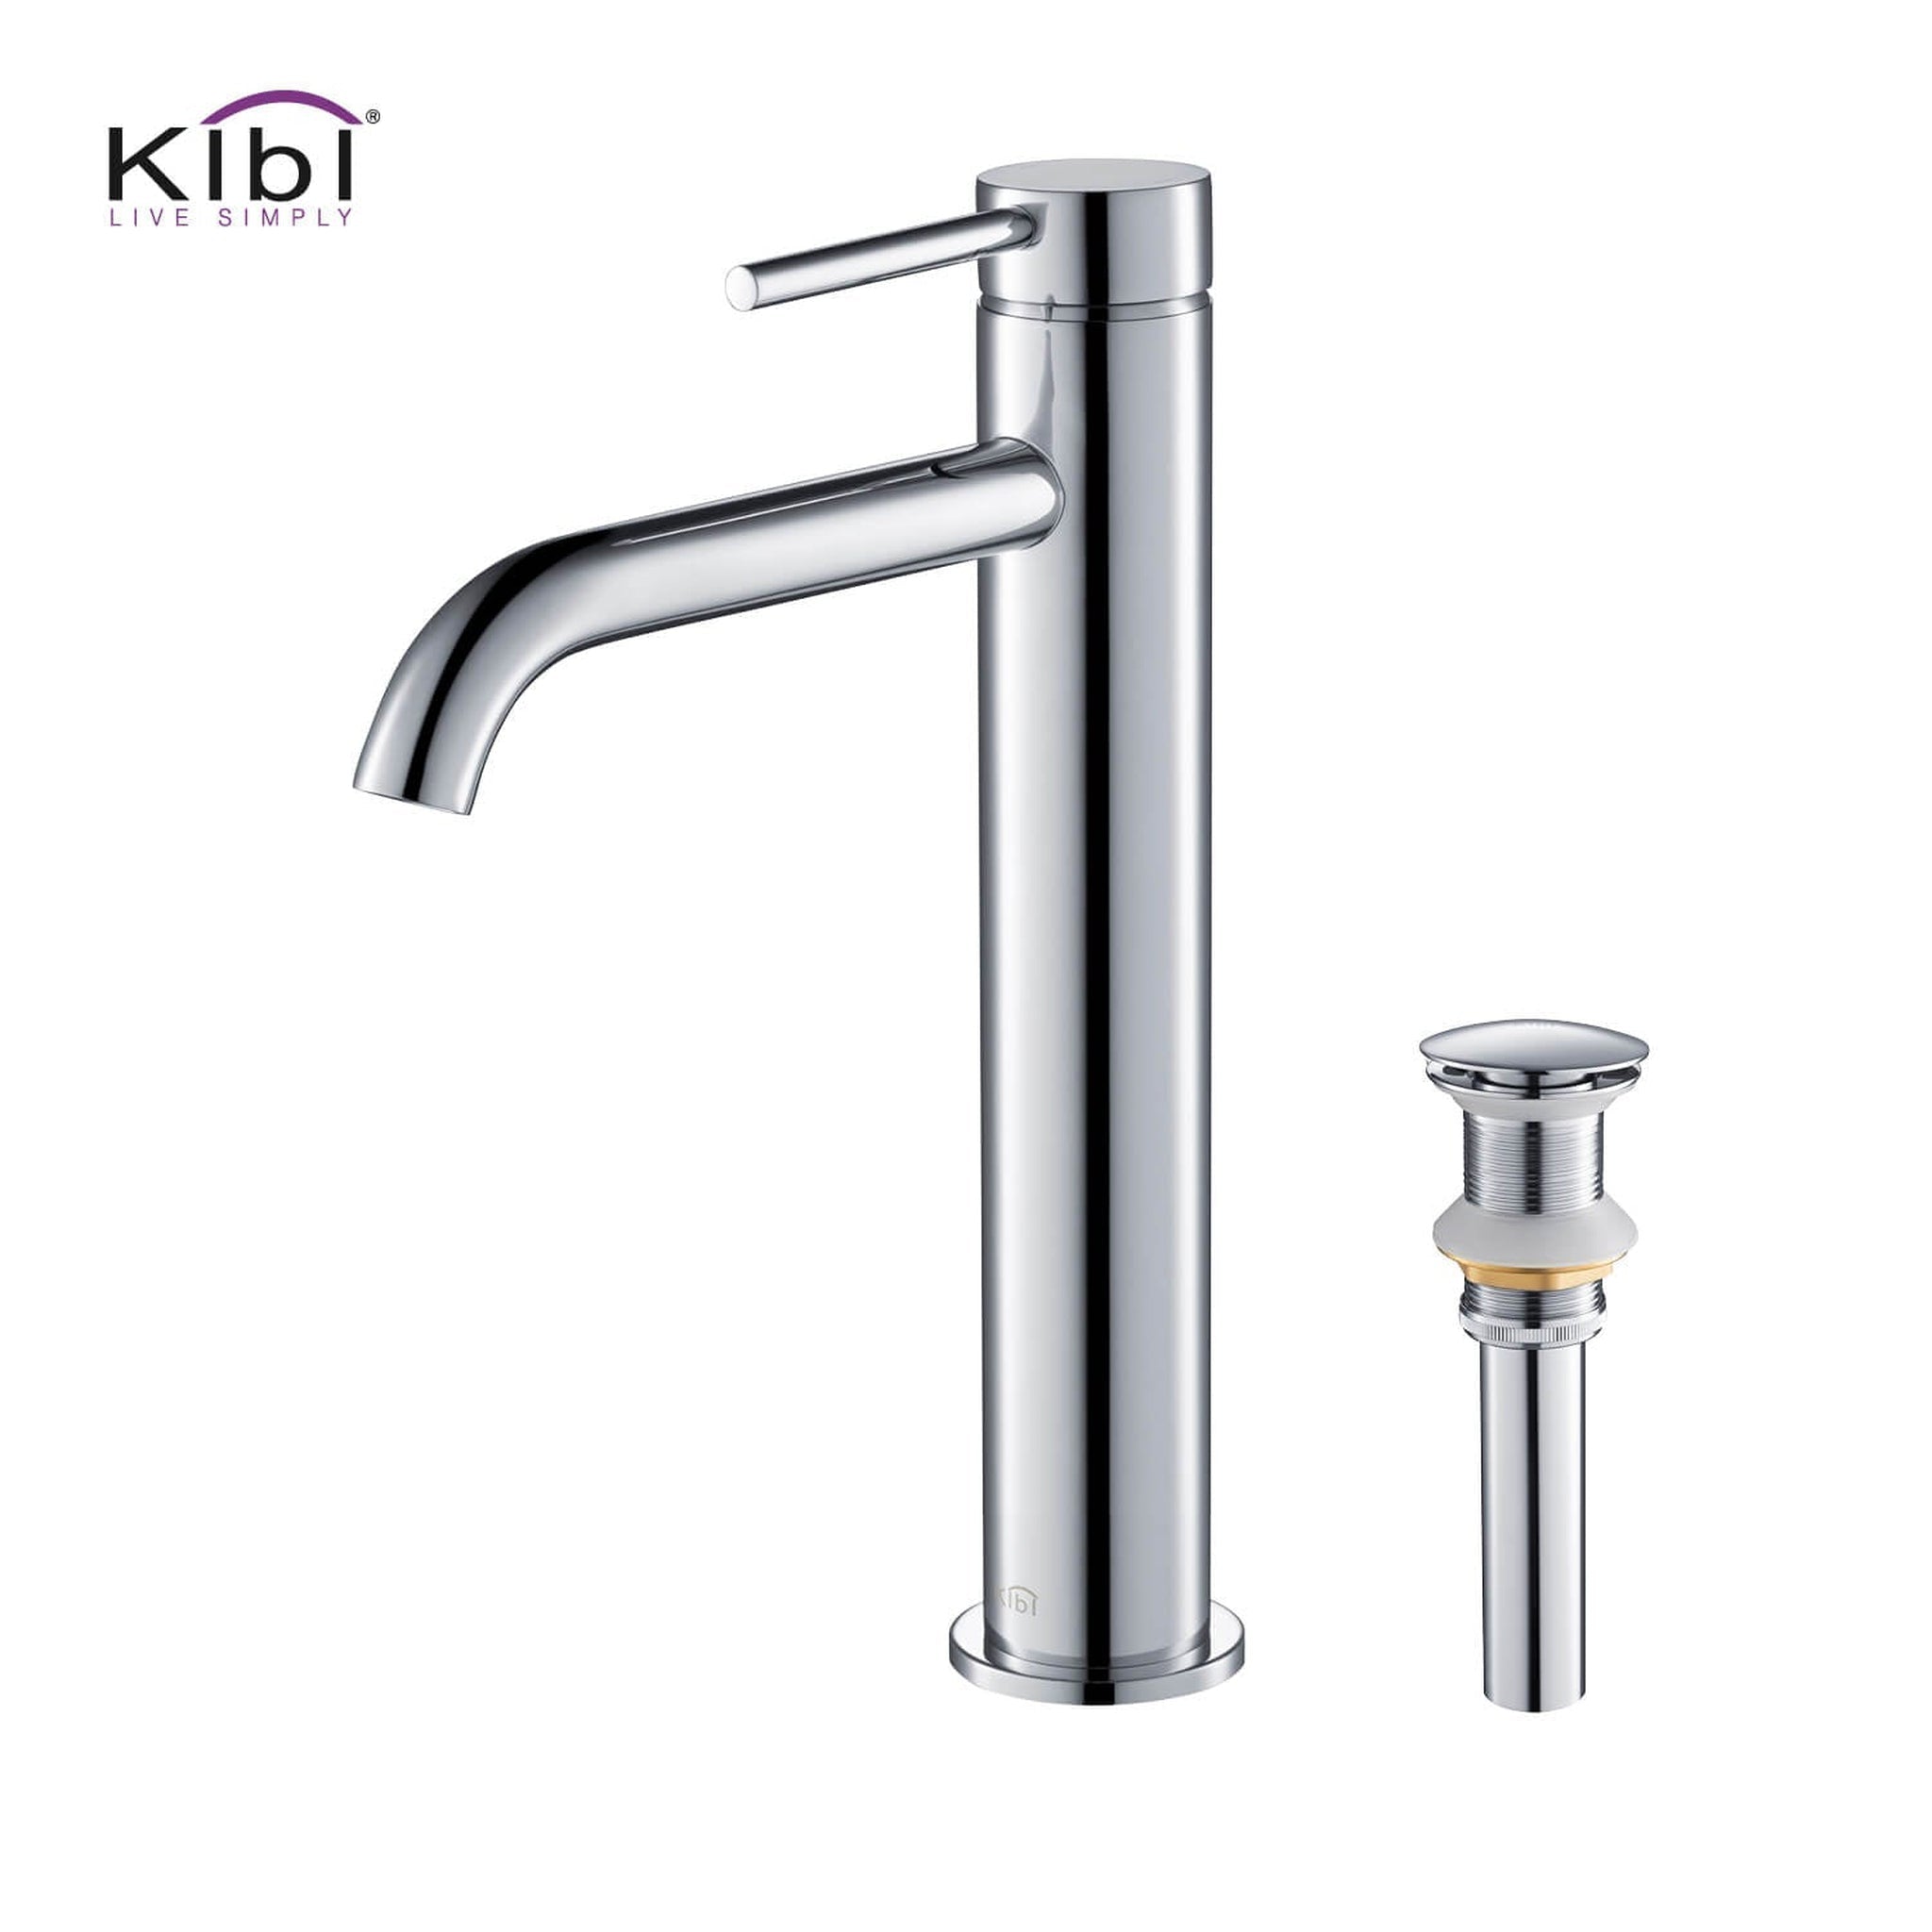 KIBI, KIBI Circular Single Handle Chrome Solid Brass Bathroom Vessel Sink Faucet With Pop-Up Drain Stopper Small Cover Without Overflow